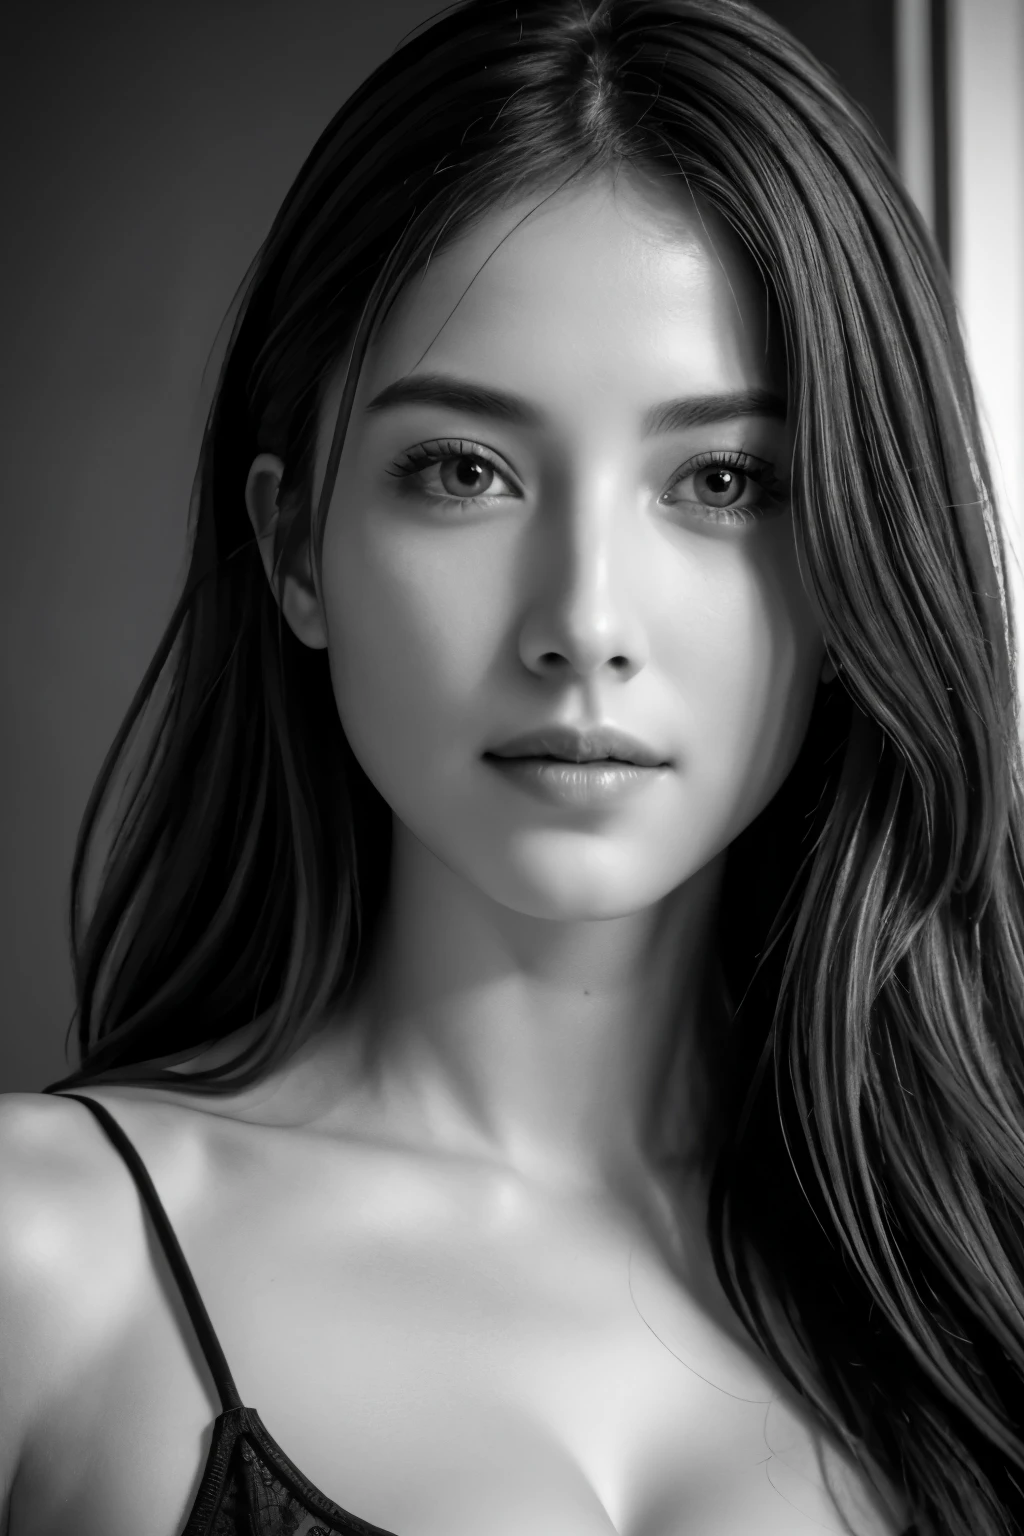 table top, highest quality, Photoreal, Super detailed, finely, High resolution, 8k wallpaper, RAW photo, Professional, Advanced level of detail, (((monochrome photography))), 1 girl, (facing the front), Upper body, perfect face, (Only lips red)